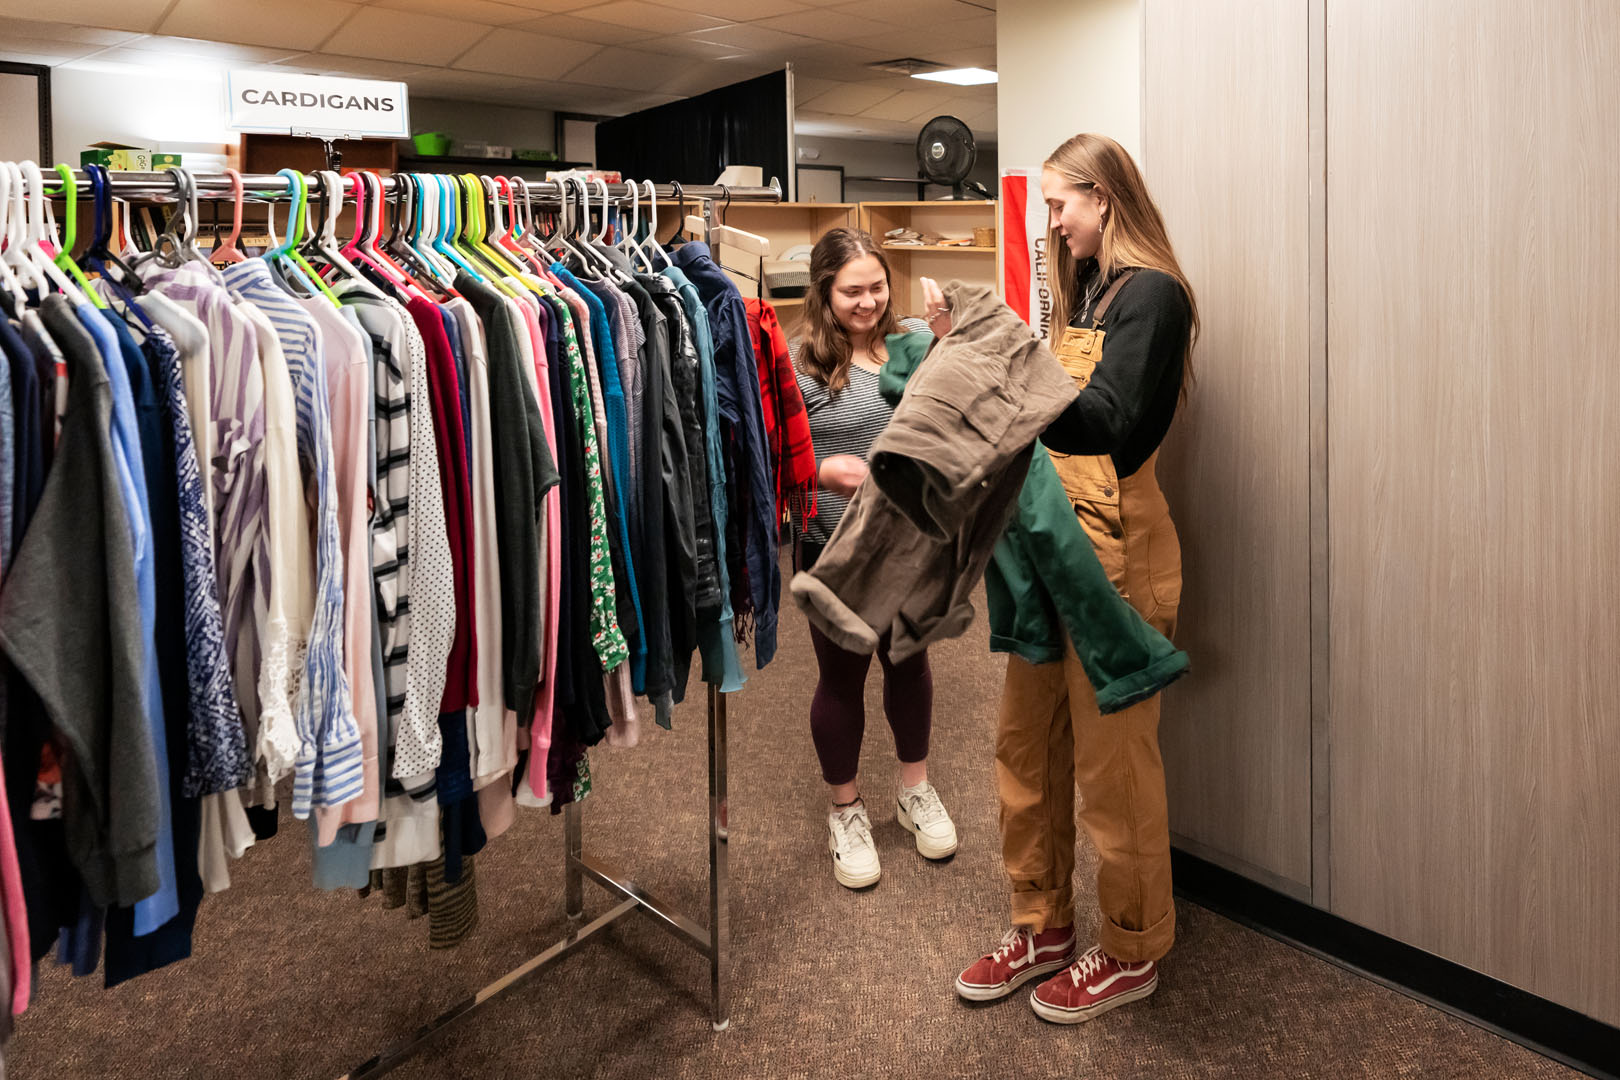 Annabelle Sparks ’23 and Kate Lamkin ‘24, co-student managers of the CC Exchange, are pictured working at the CC Exchange on Dec. 8, 2022. Photo by Lonnie Timmons III / Colorado College.